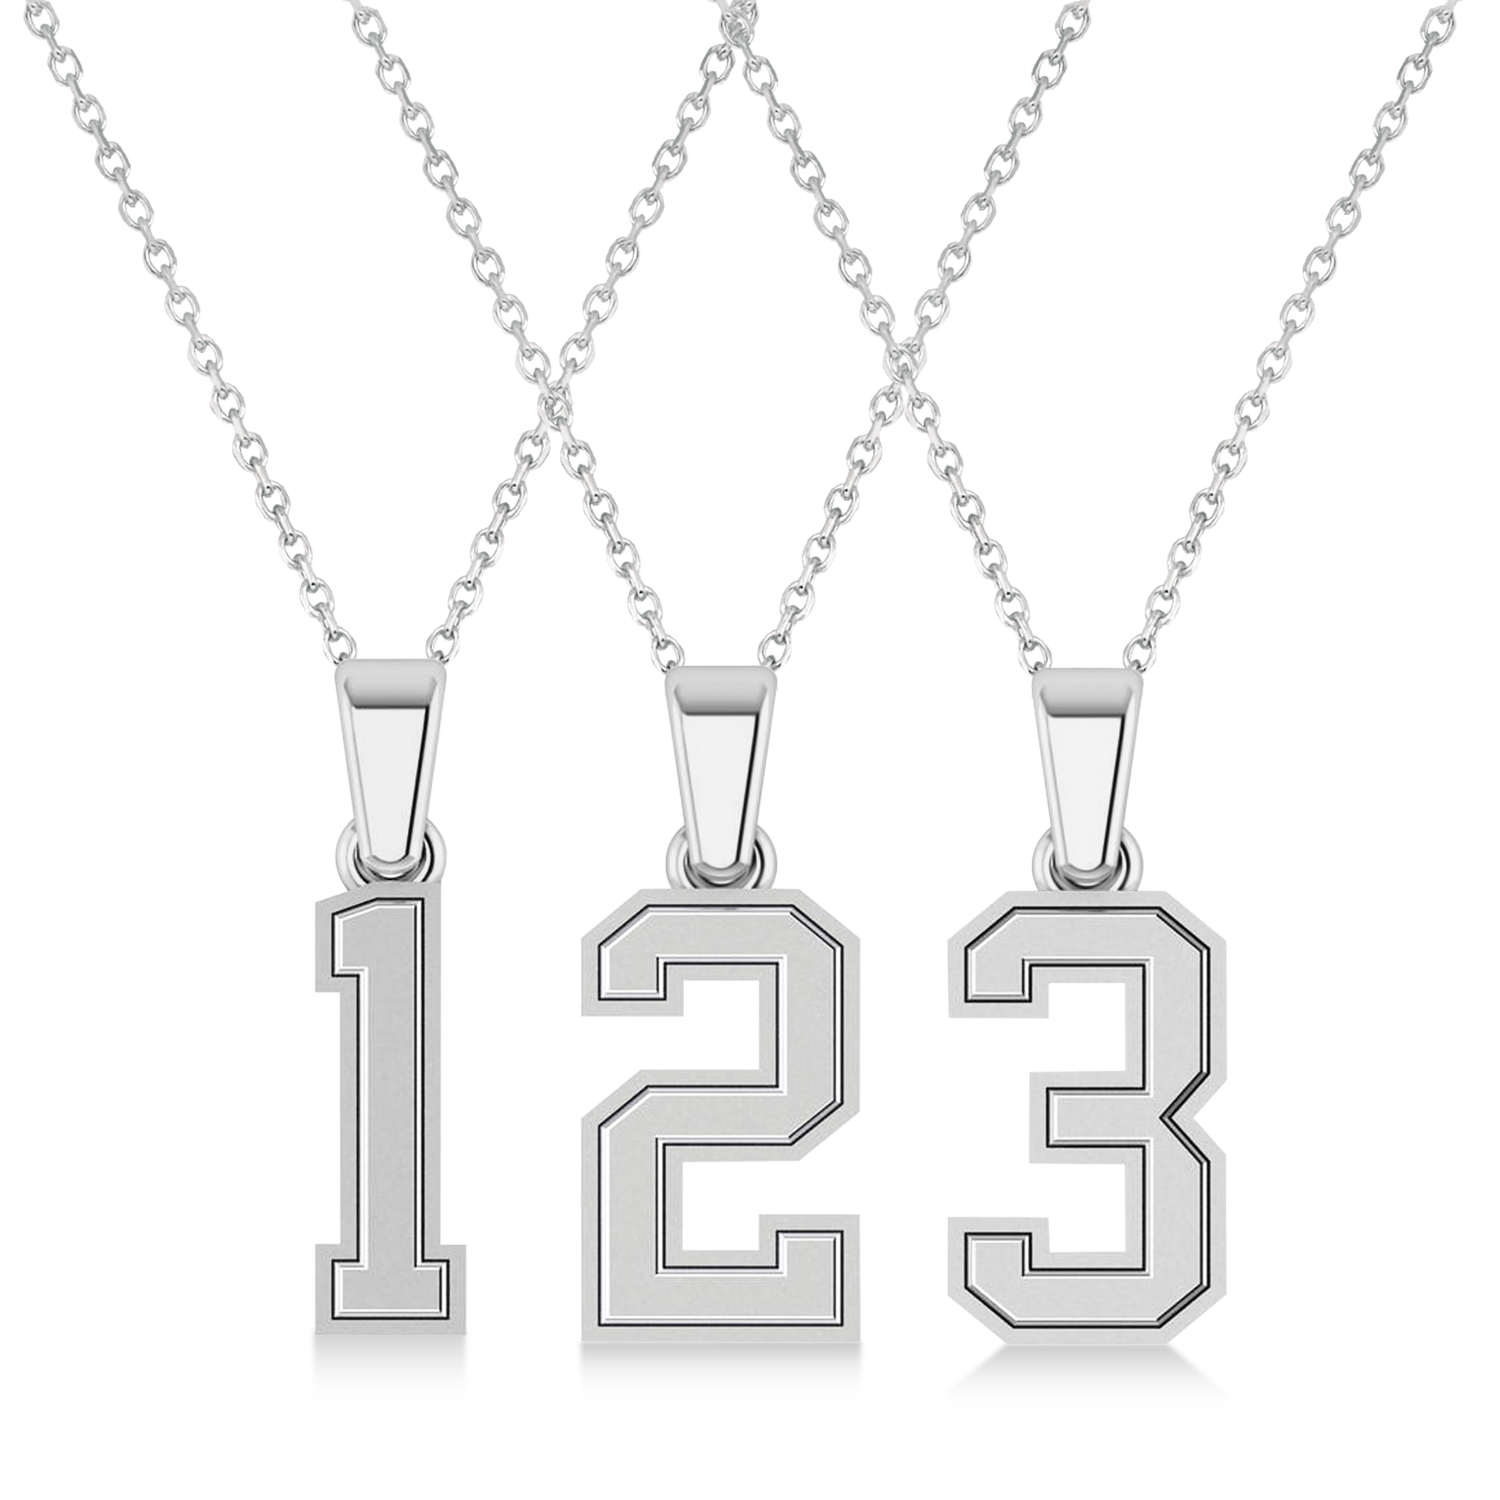 Personalized Jersey Number Pendant Necklace 14k White Gold